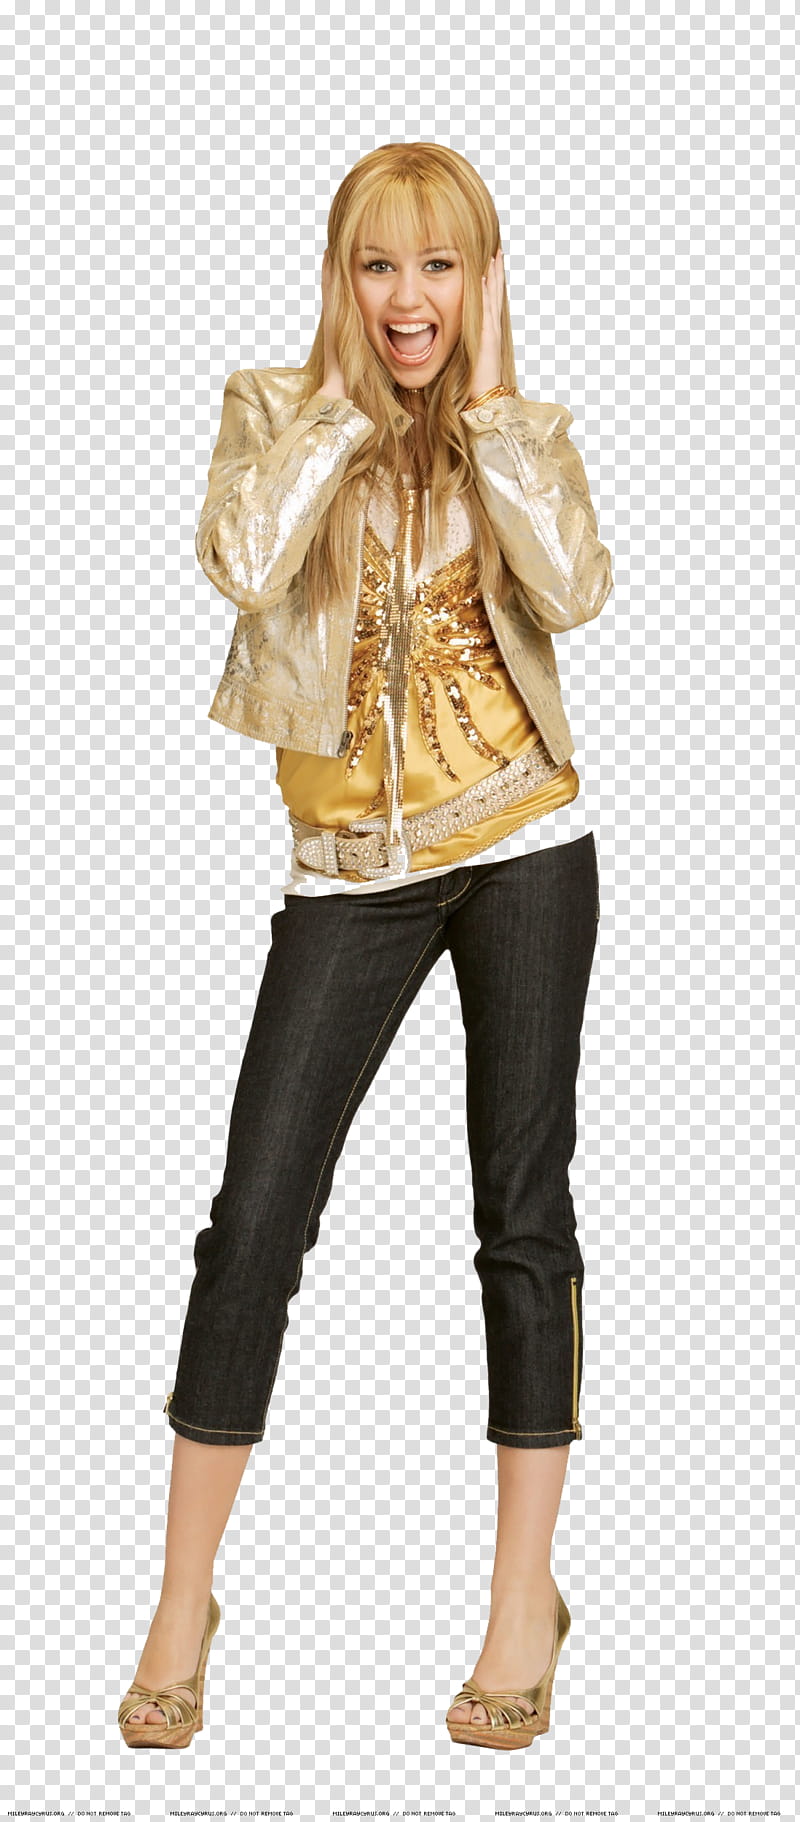 women's gold-colored jacket and black pants transparent background PNG clipart